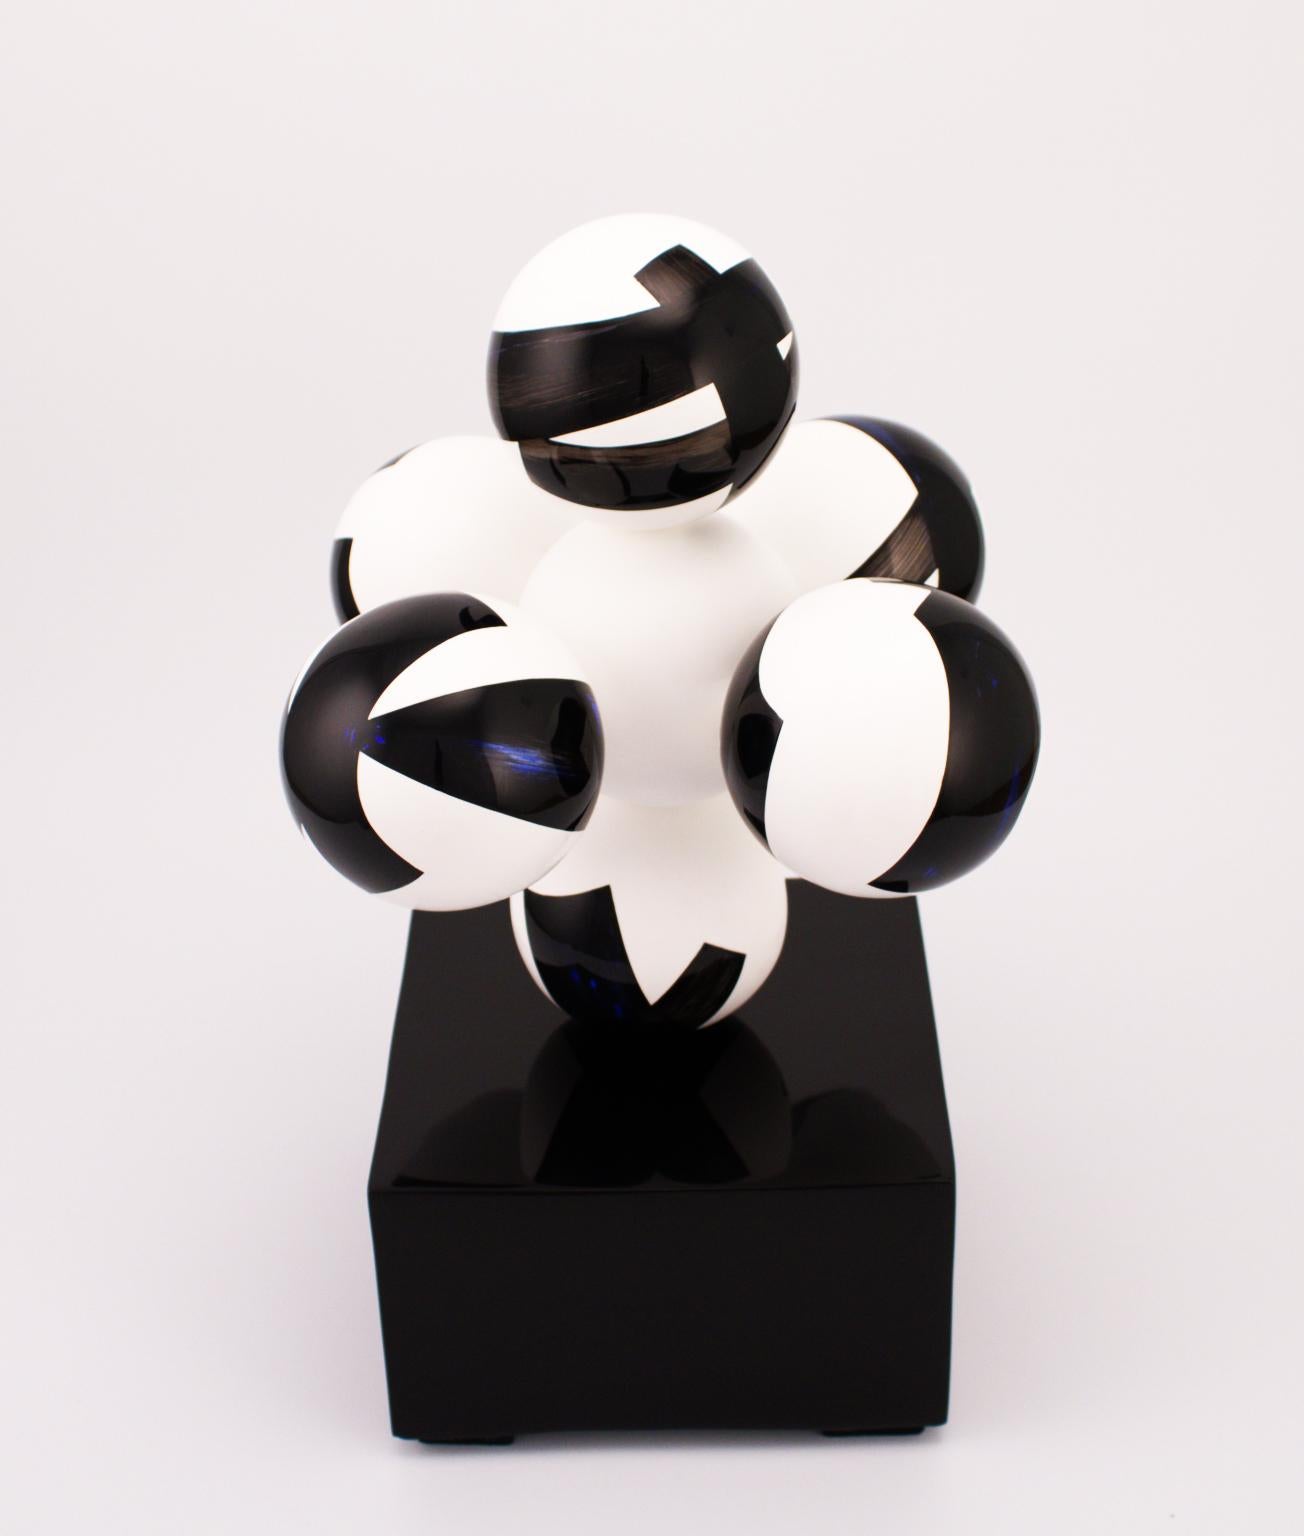 Seven Spheres Lacquered Ceramic Sculpture by Golem For Sale 2